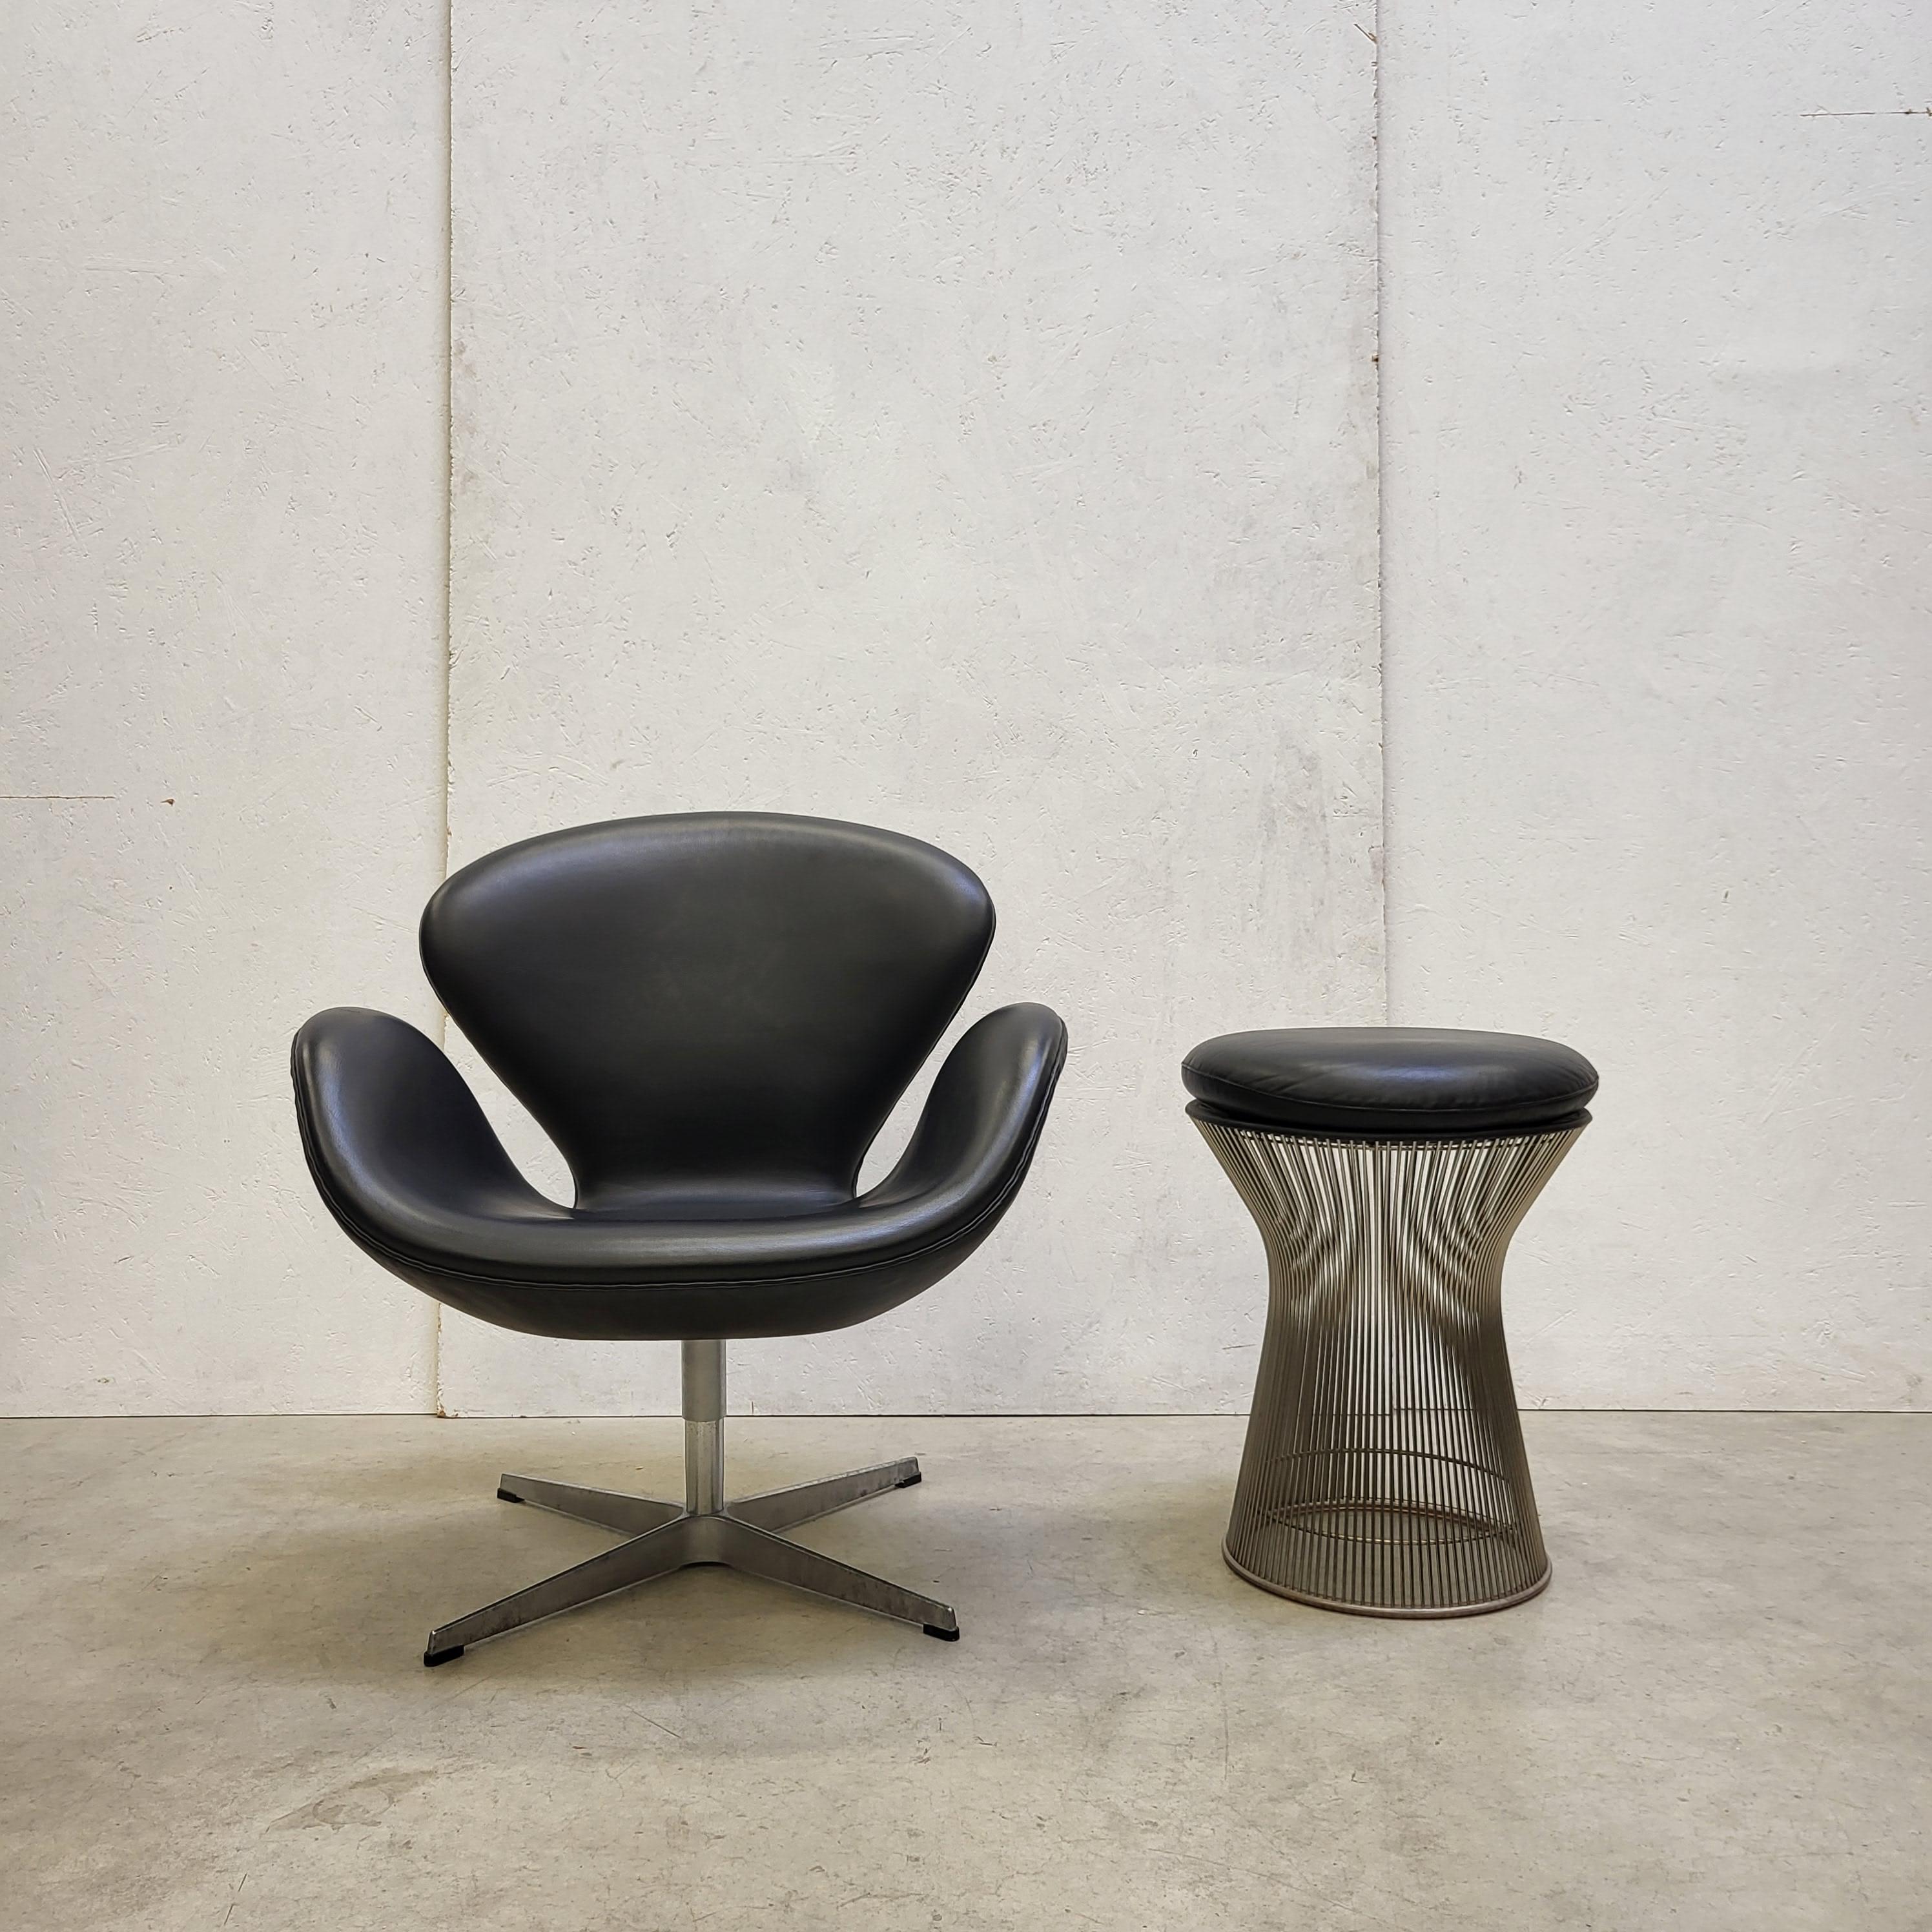 Hand-Crafted Warren Platner Stool for Knoll Black Leather, 2000s For Sale